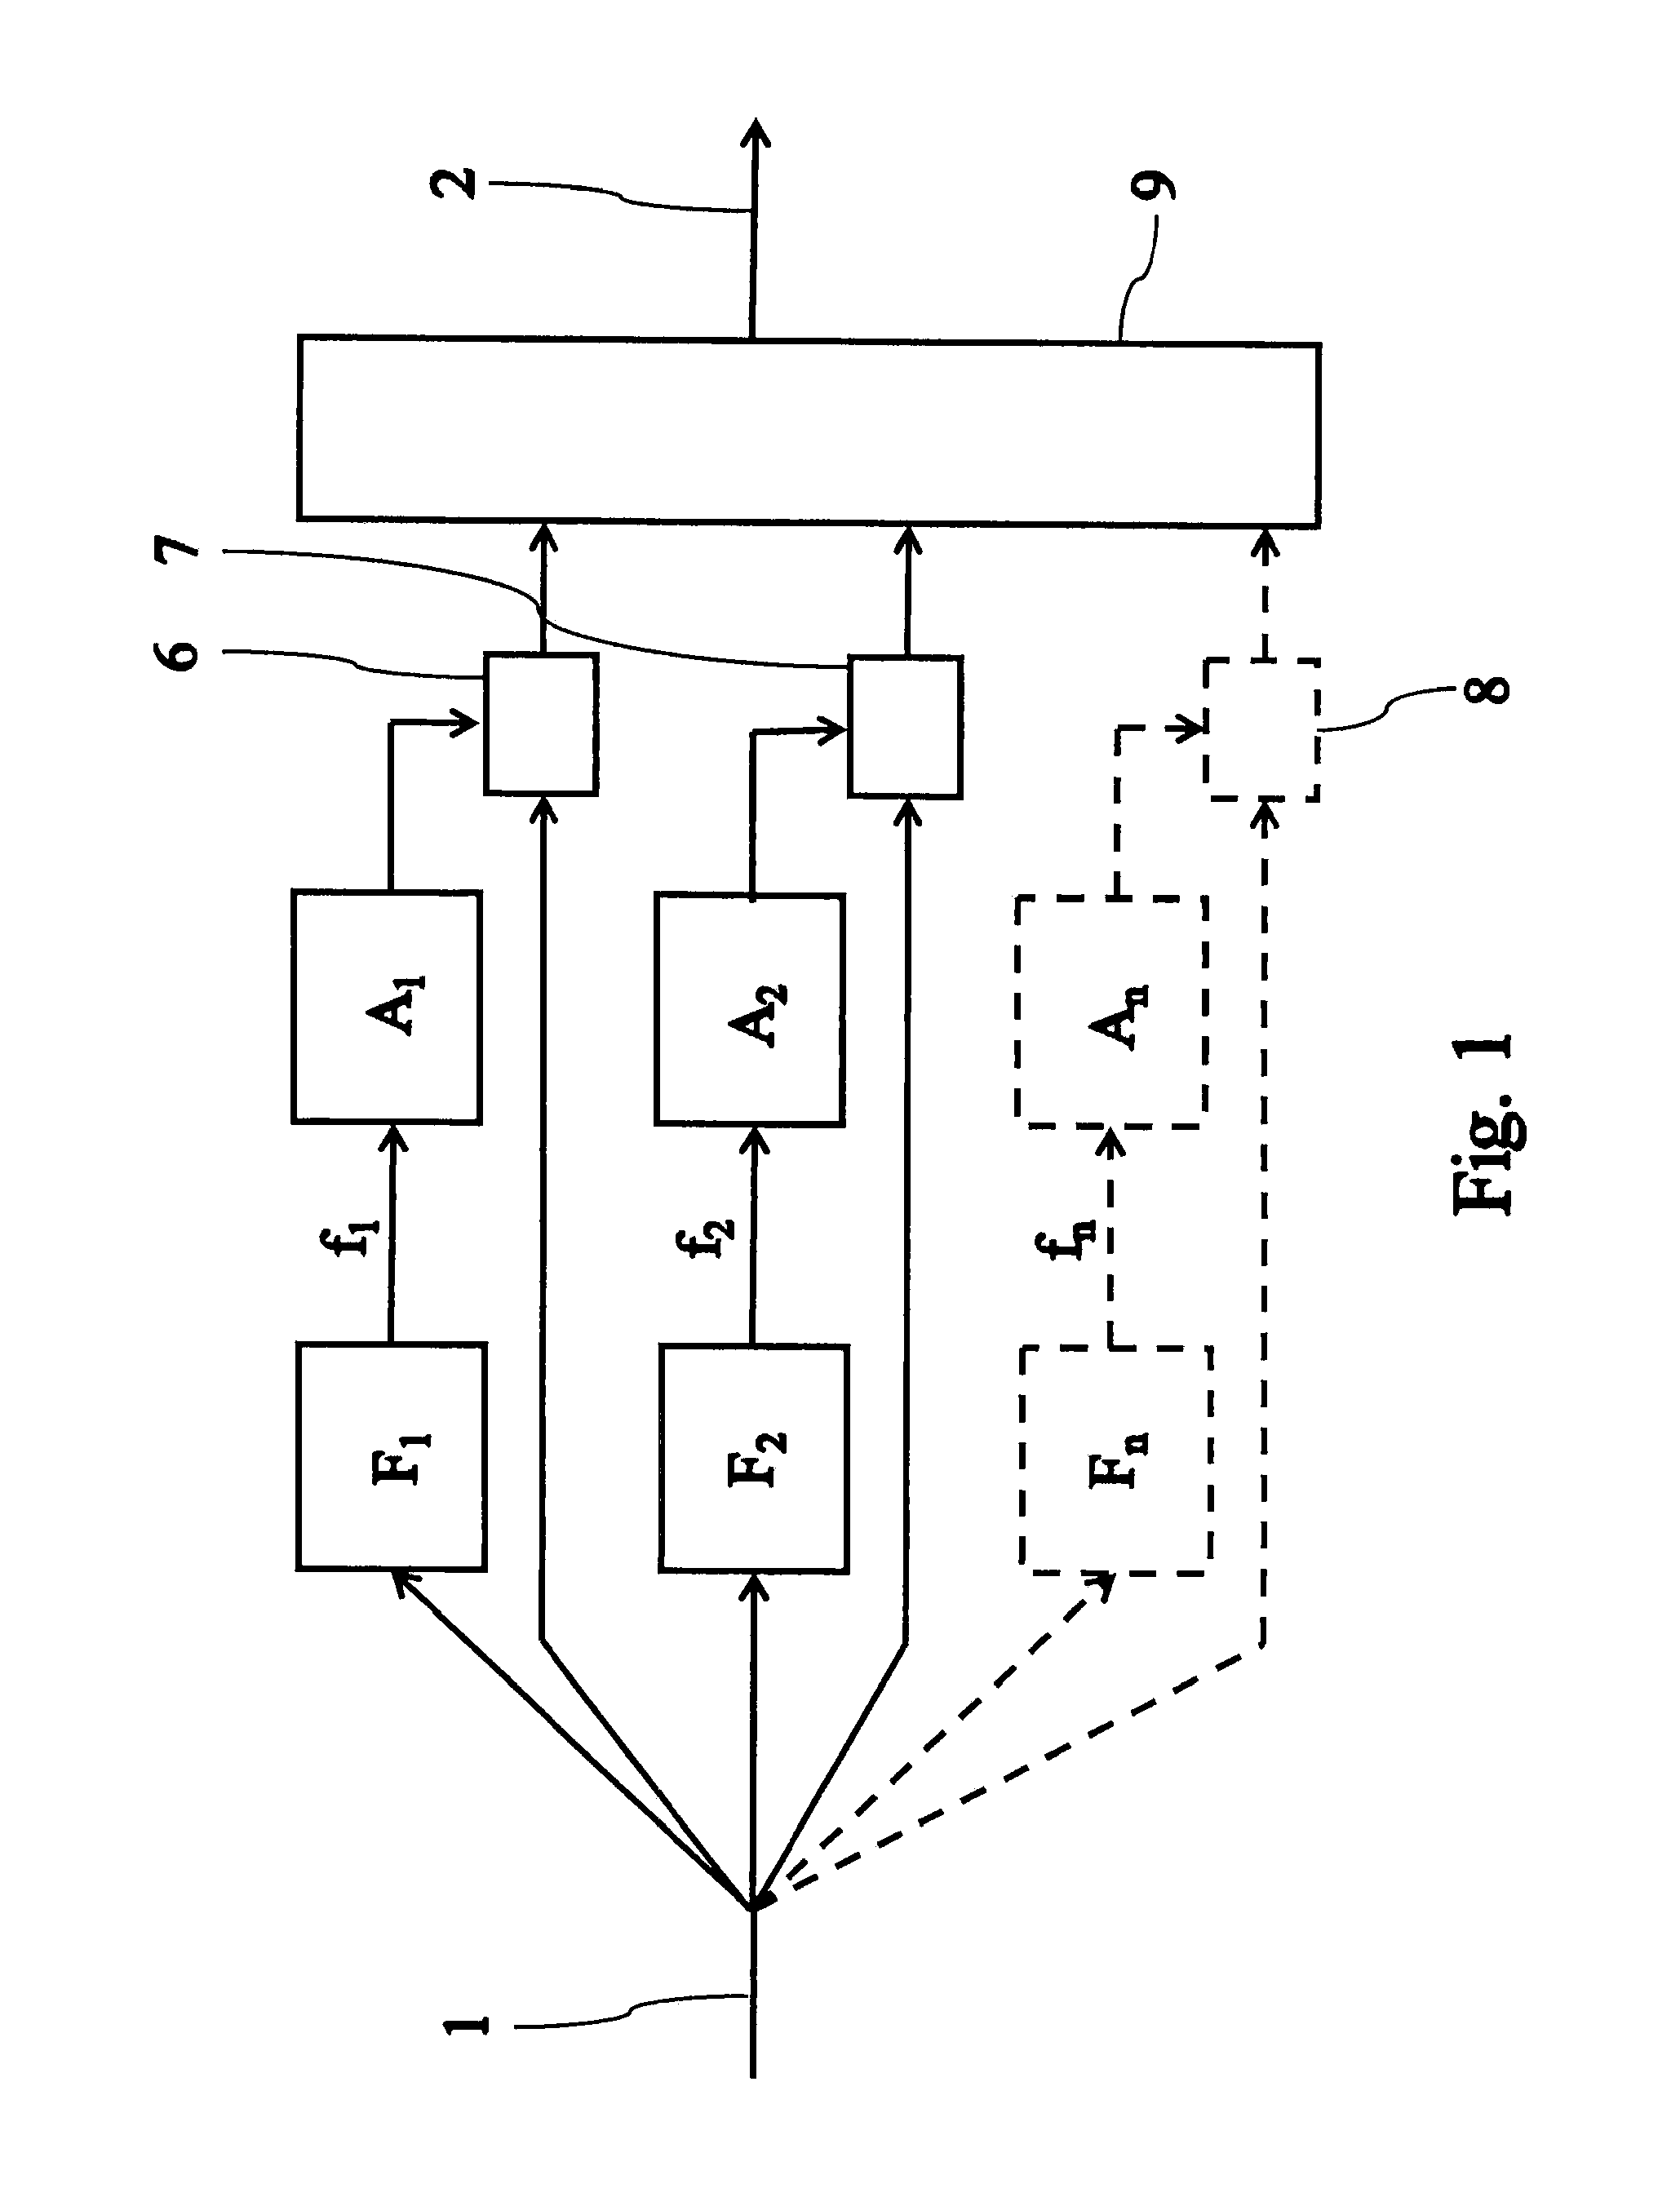 Method and Apparatus for Measuring Blood Pressure